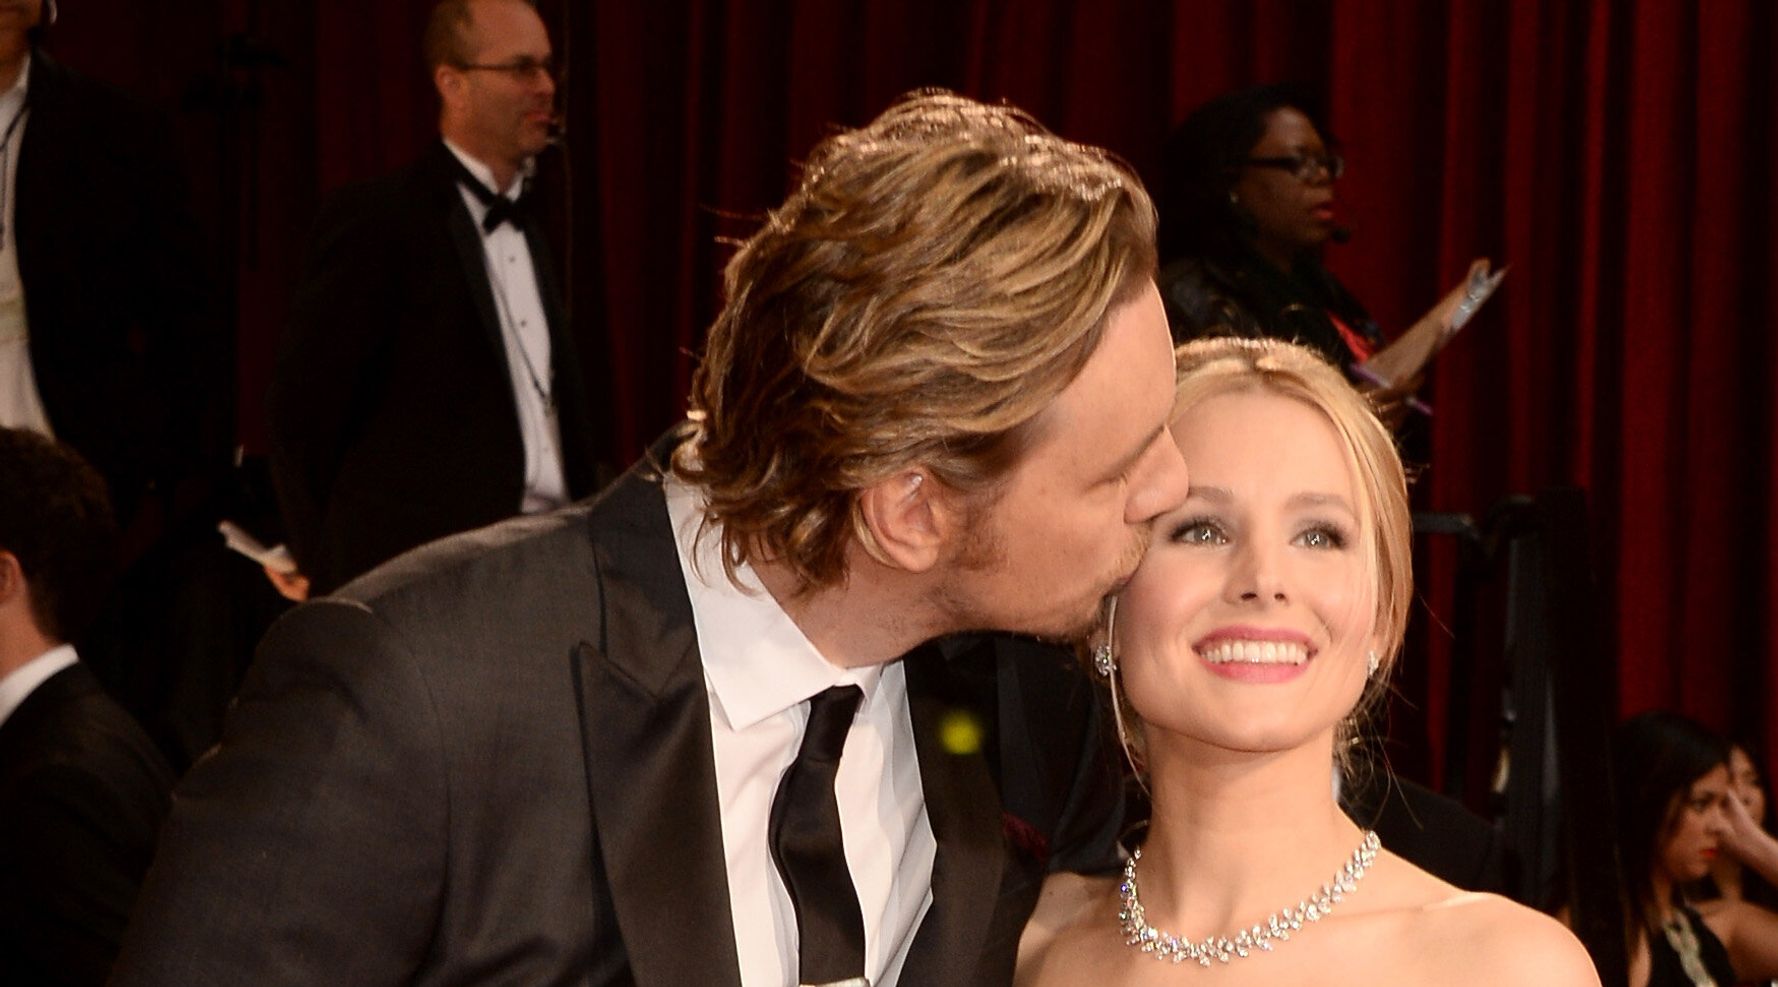 Dax Shepard Gushes Over Kristen Bell's 'Buns' In Funny Birthday Post